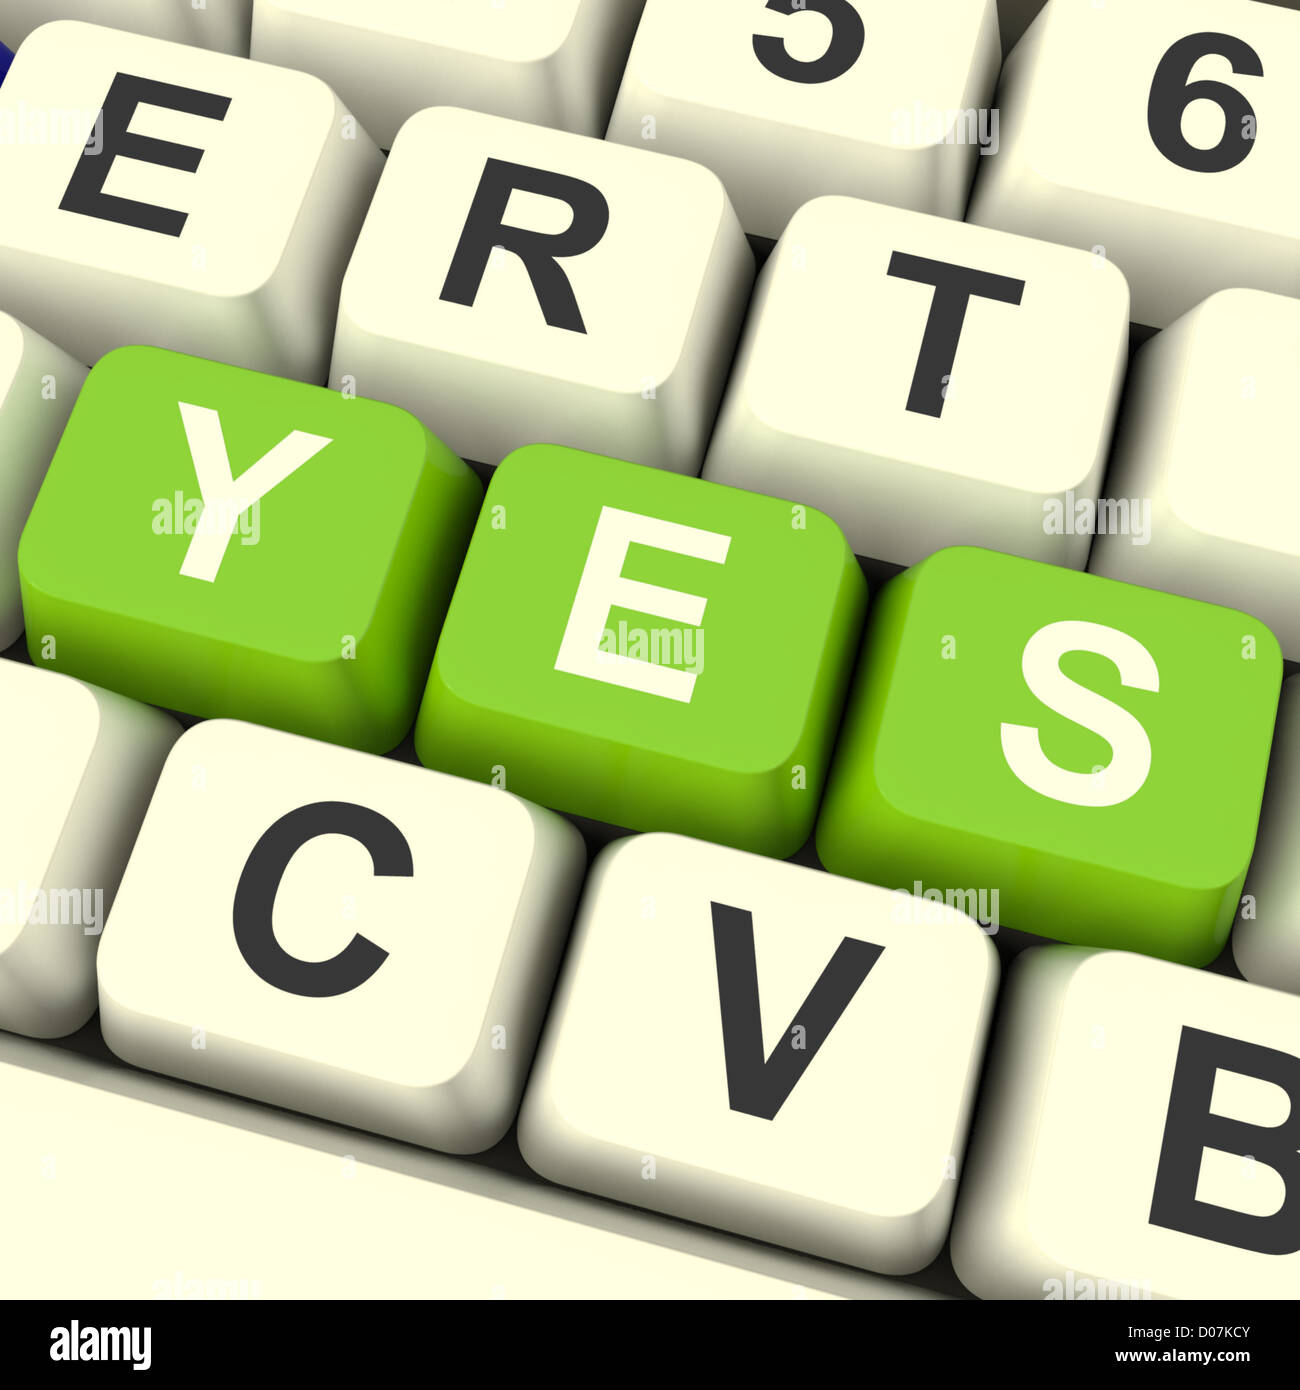 Yes Computer Keys In Green Showing Approval And Support Stock Photo